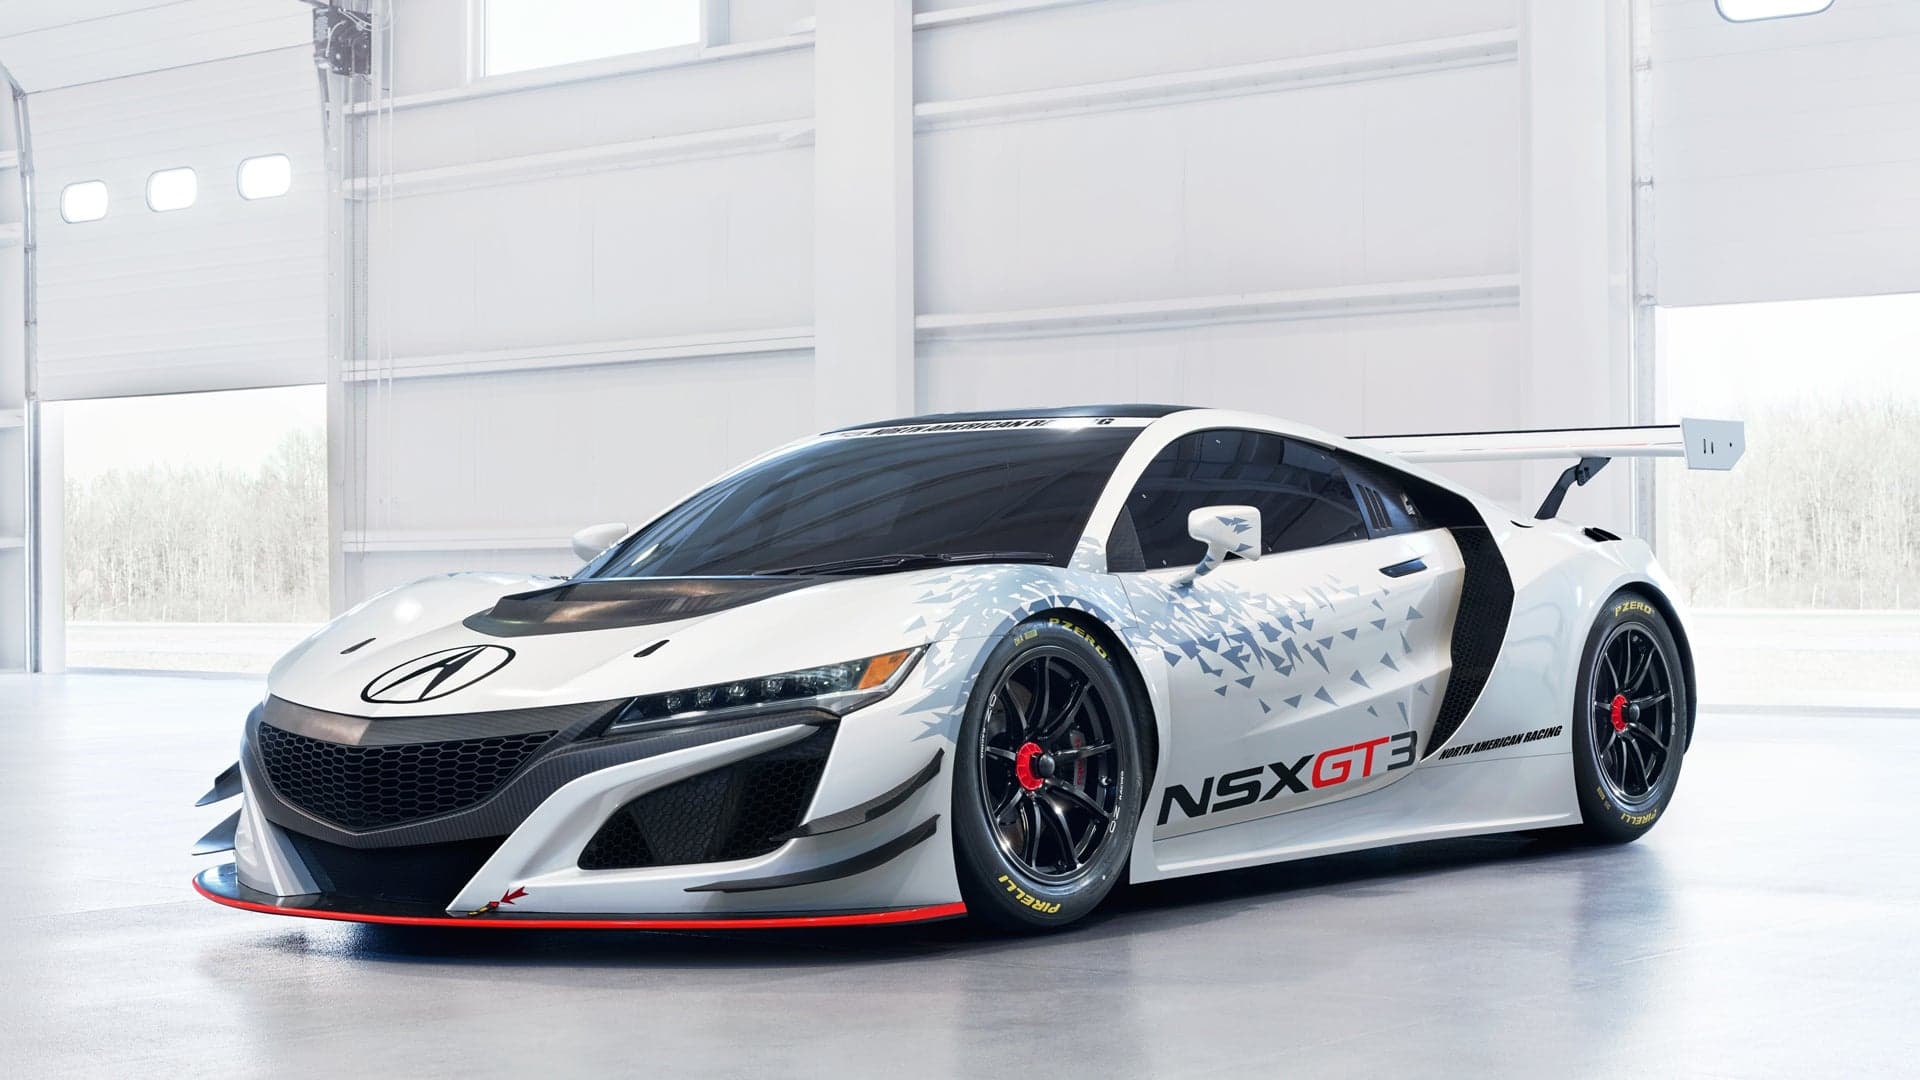 Your Non-Hybrid, Rear-Drive 2017 Acura NSX Has Arrived